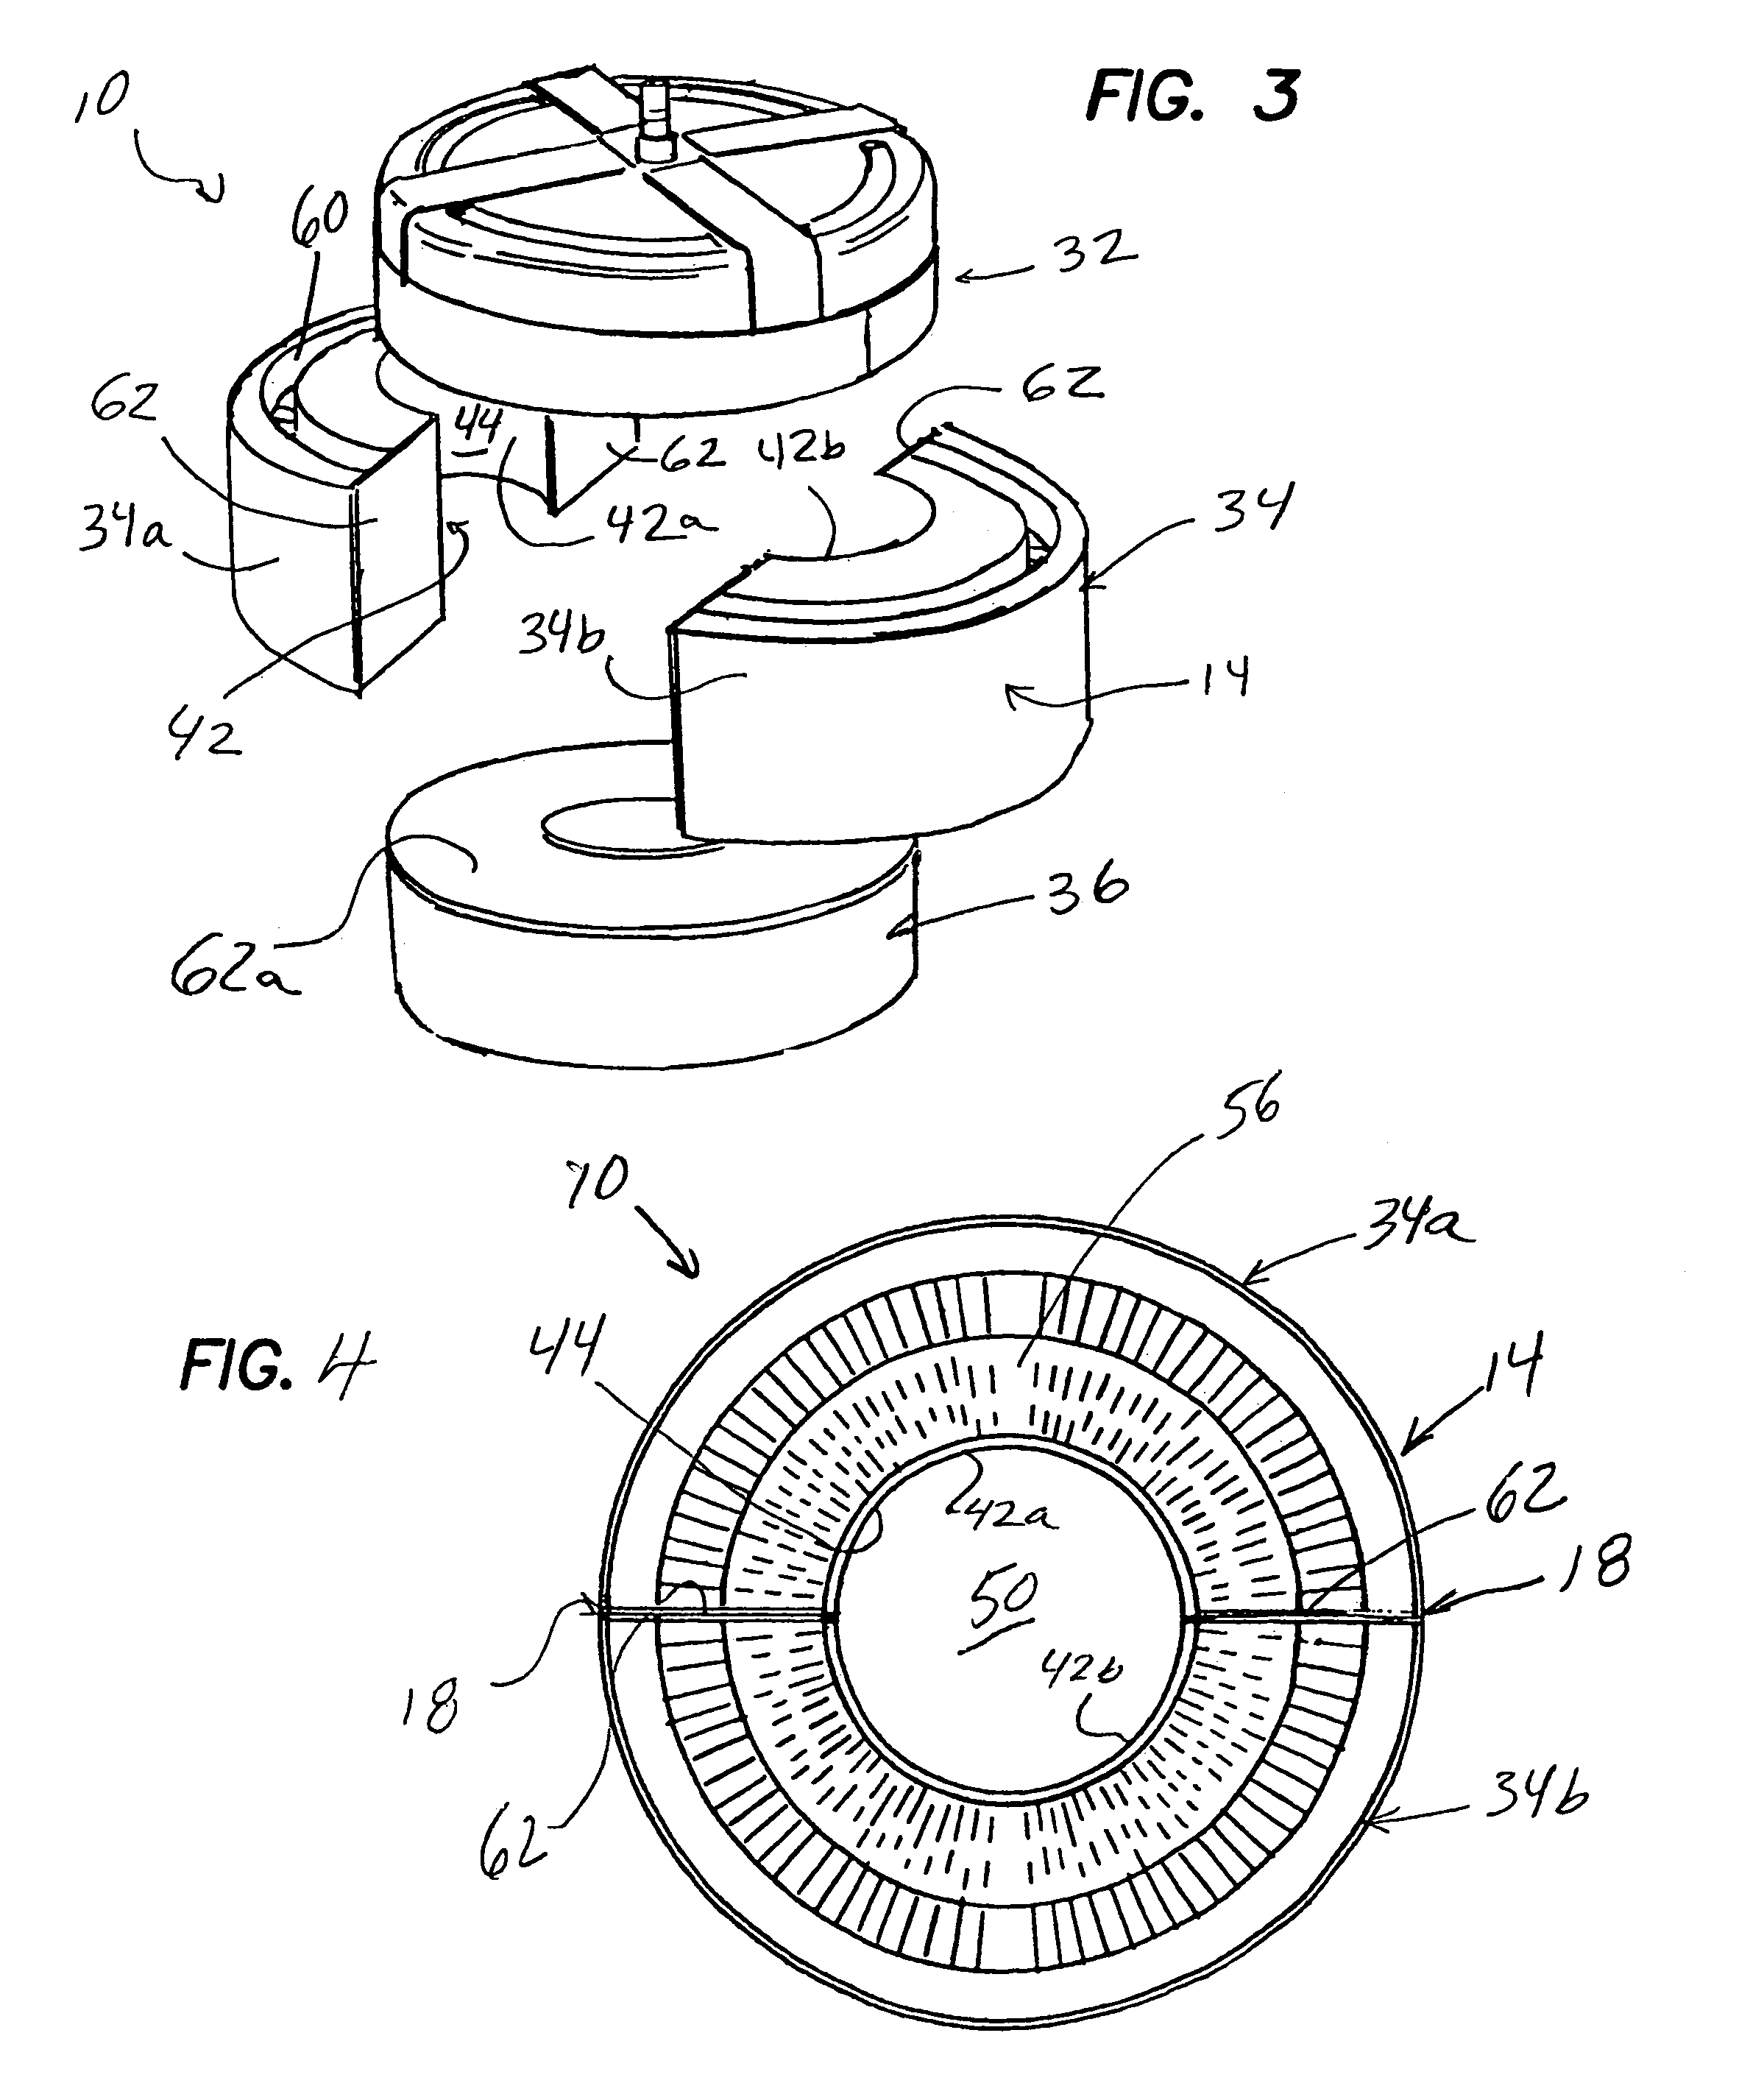 Method and apparatus for making dry ice